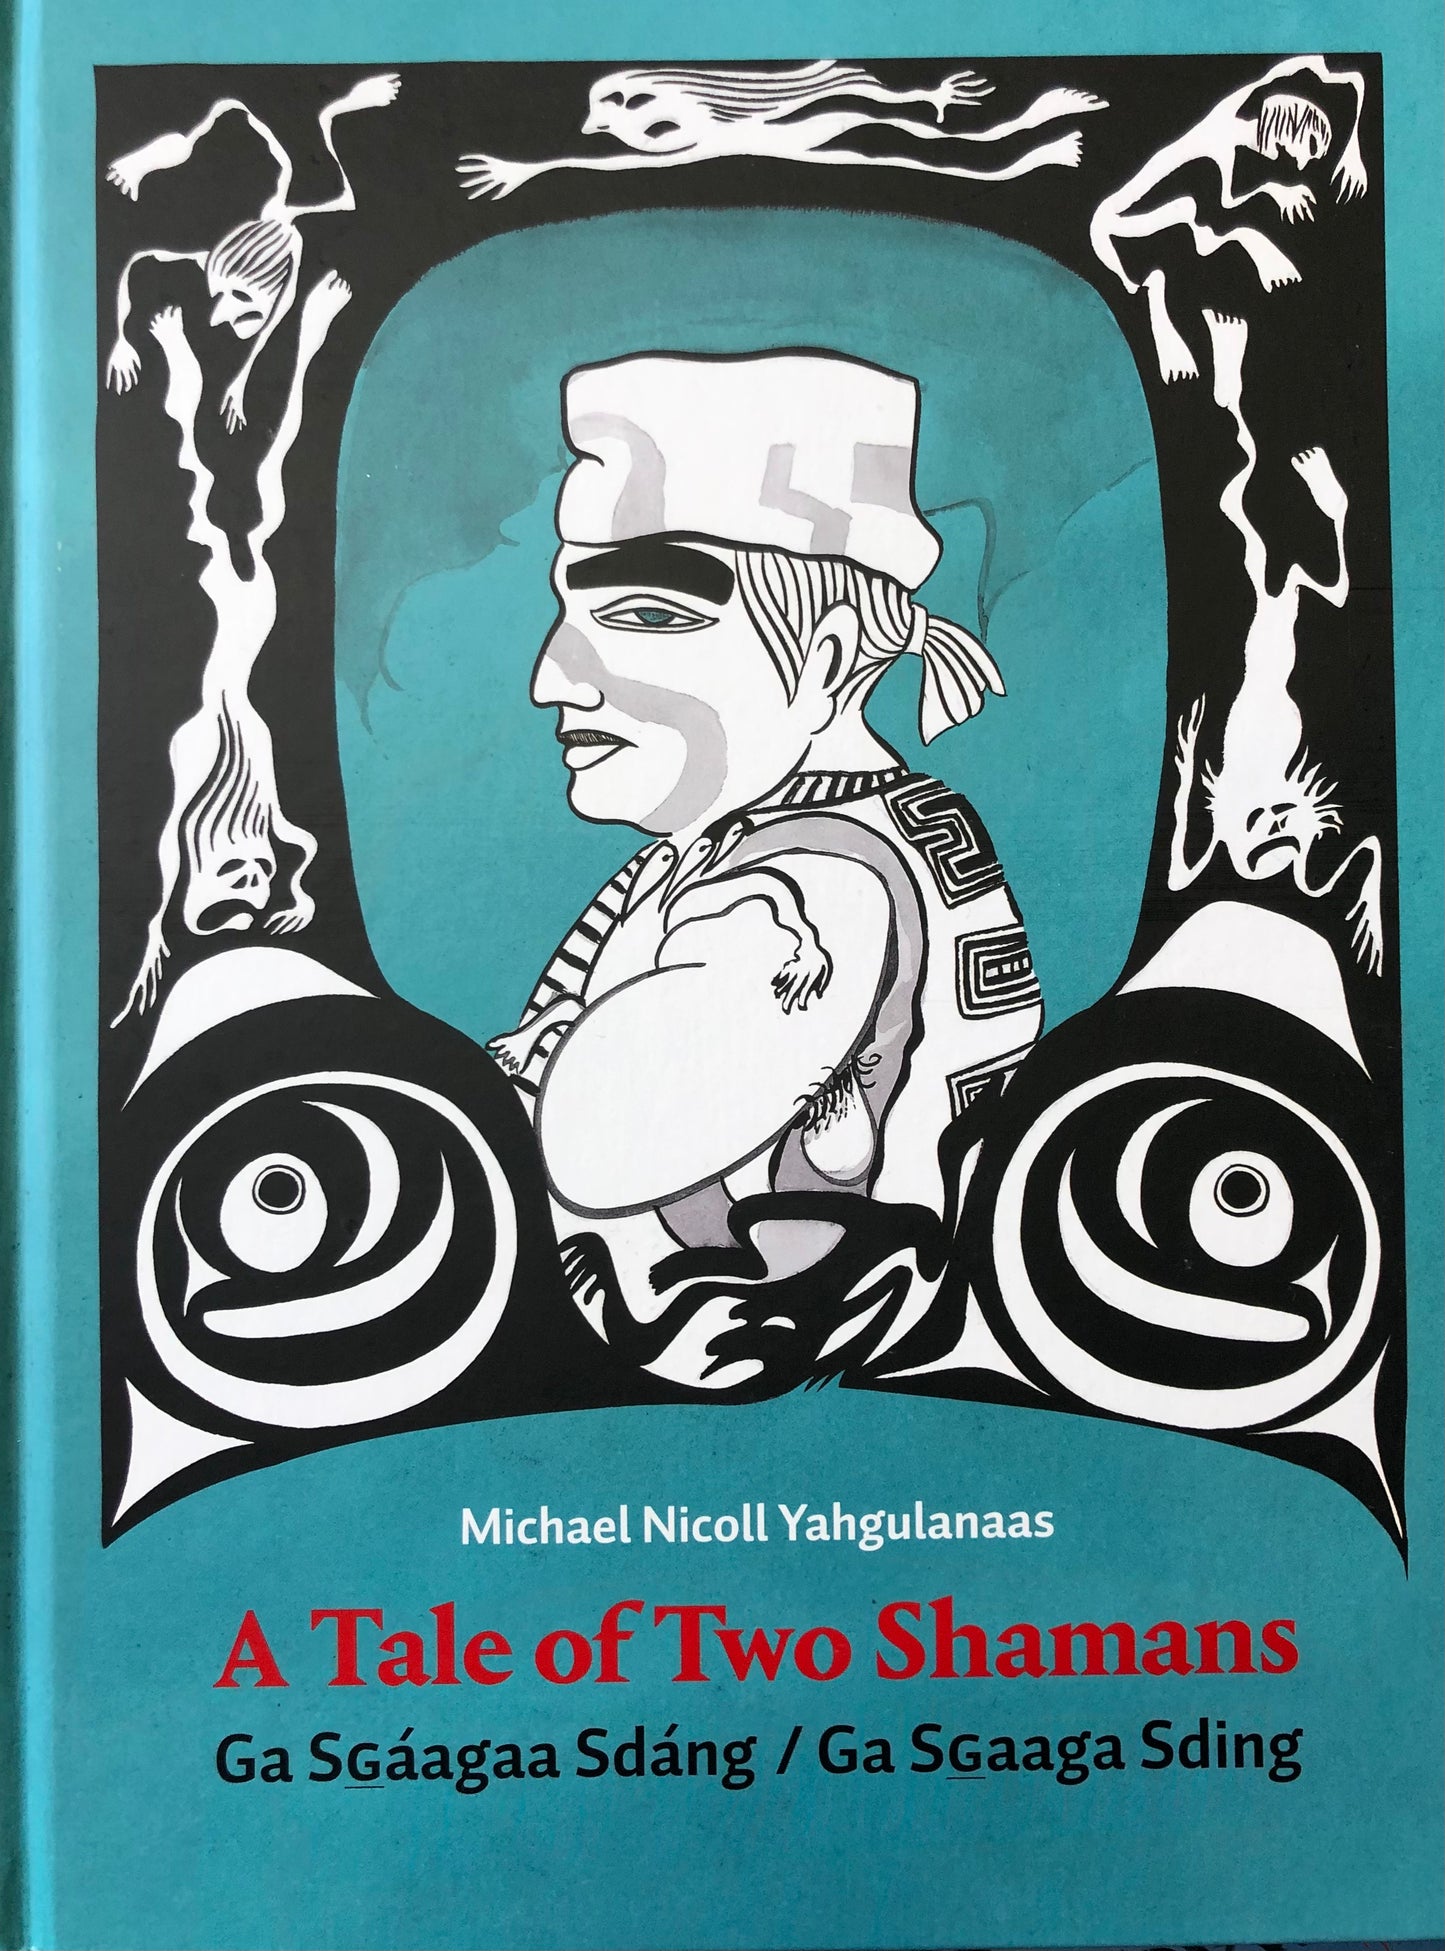 A Tale of Two Shamans